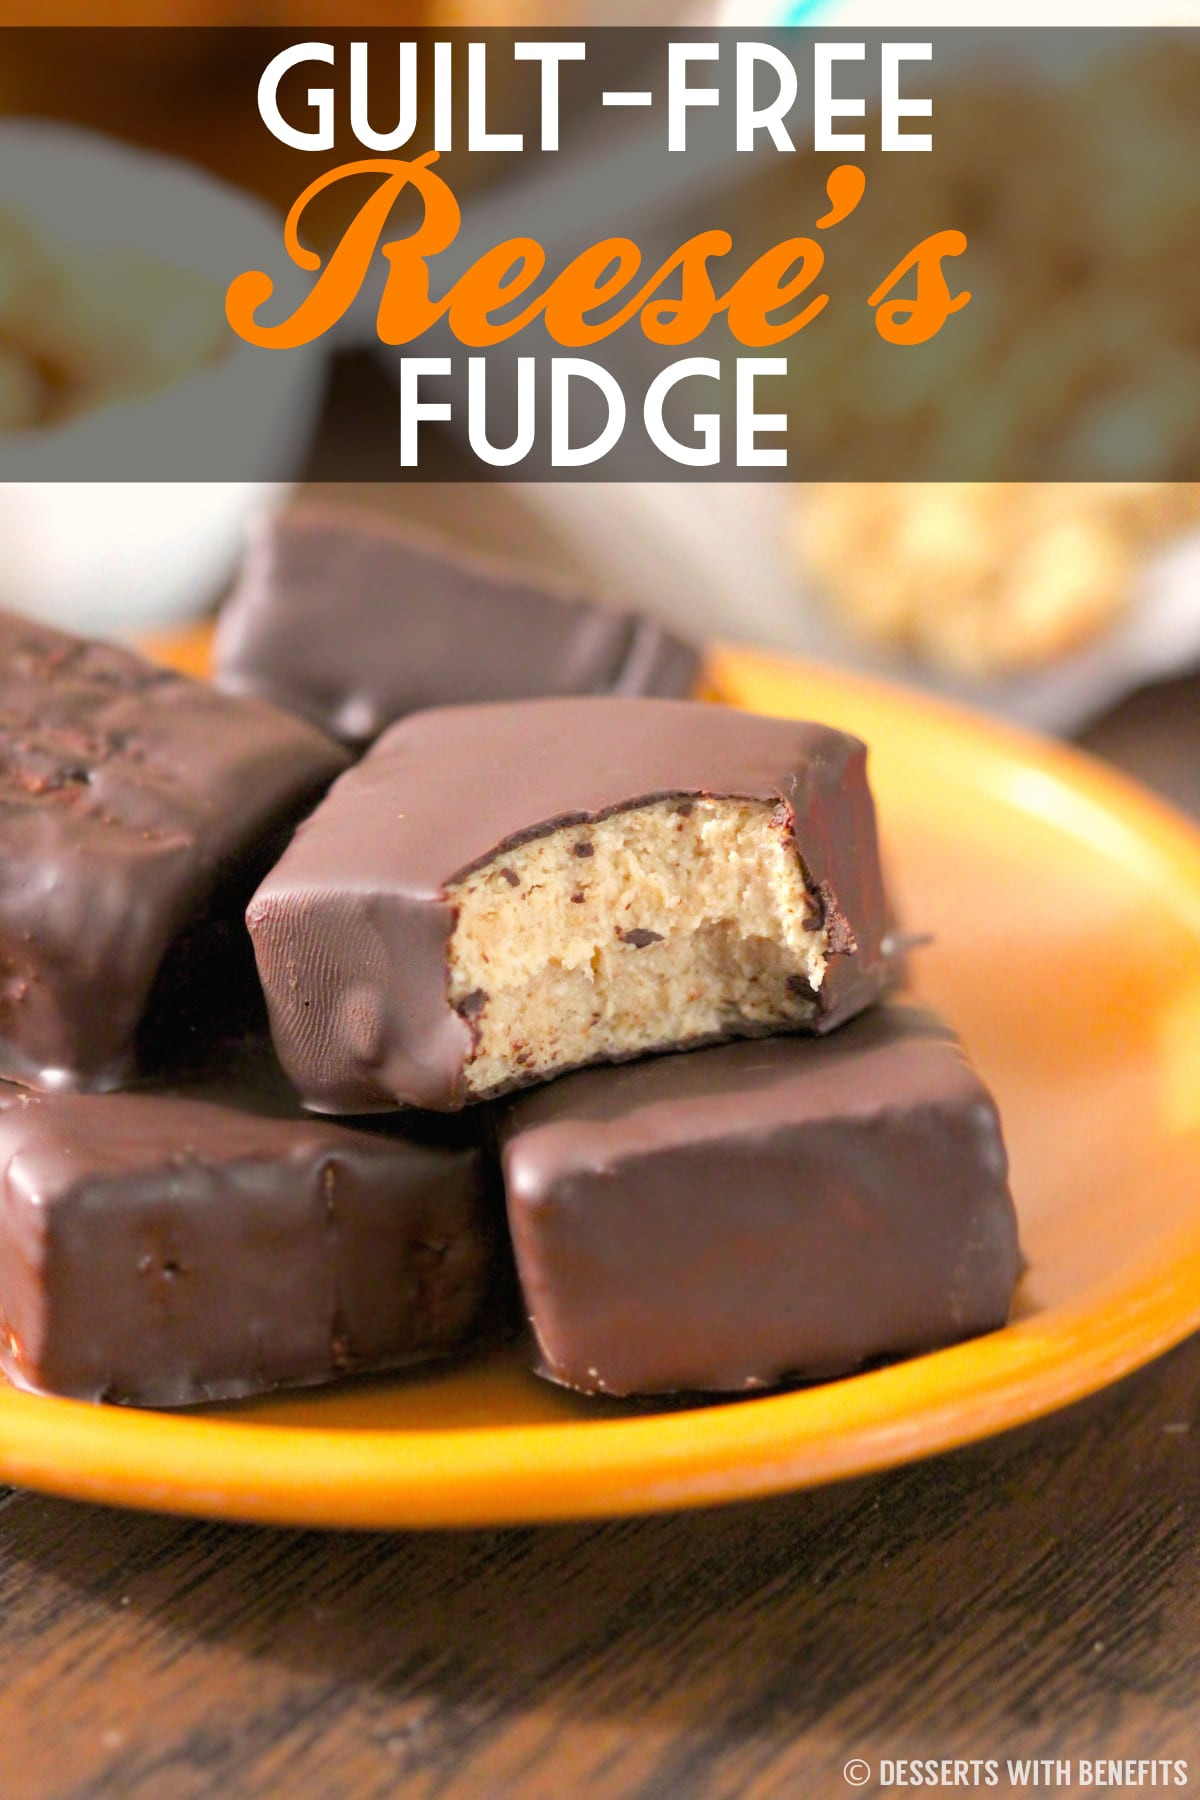 Low Fat Sugar Free Desserts
 Healthy Reese s Fudge Desserts with Benefits